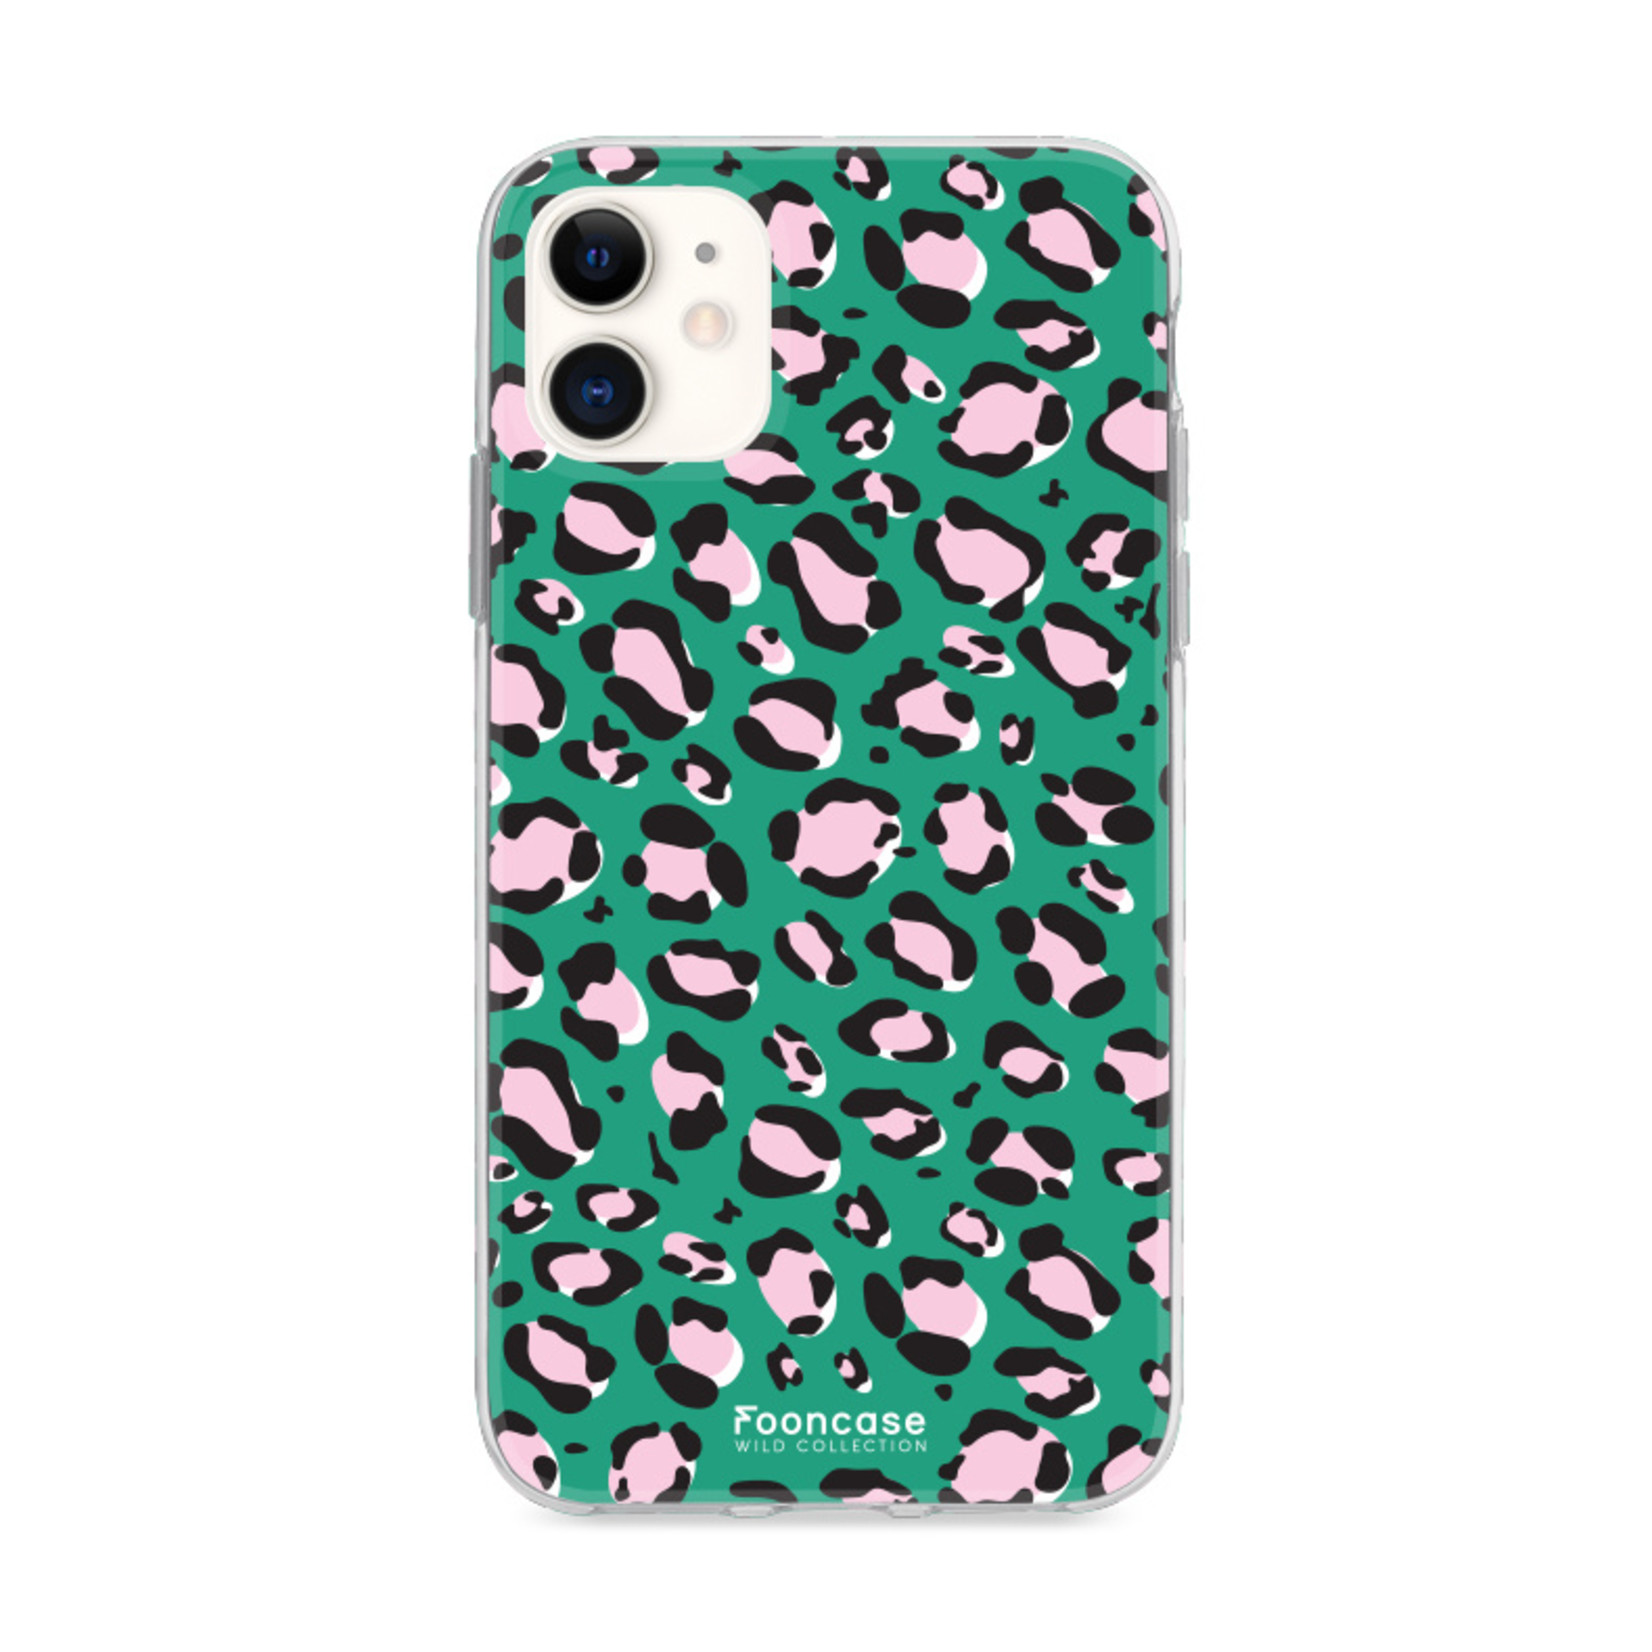 FOONCASE Iphone 12 - WILD COLLECTION / Green